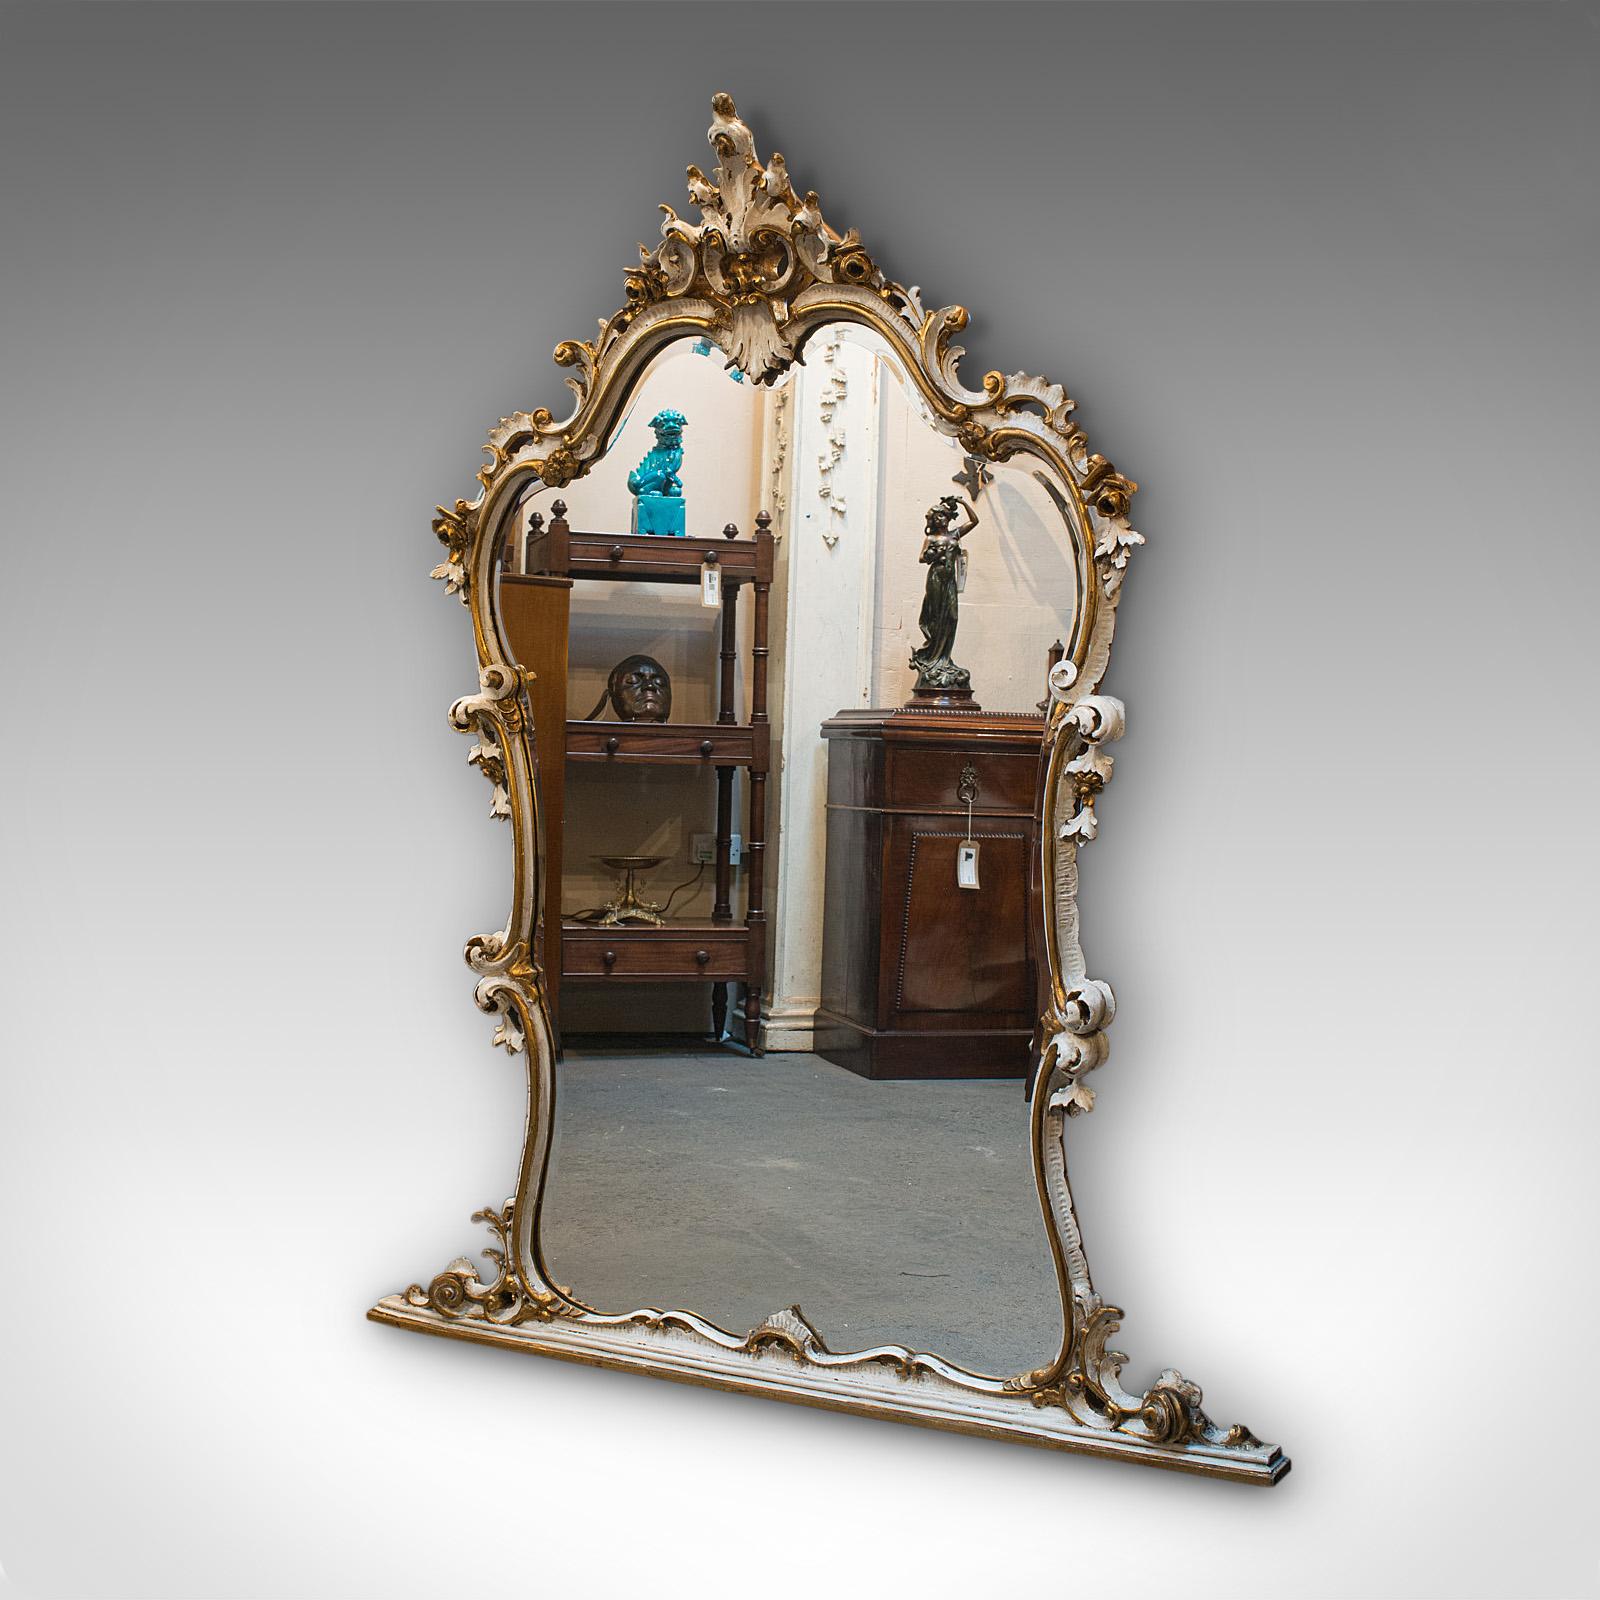 20th Century Large Antique Overmantel Mirror, French, Gilt Gesso, Classical, Italianate, 1900